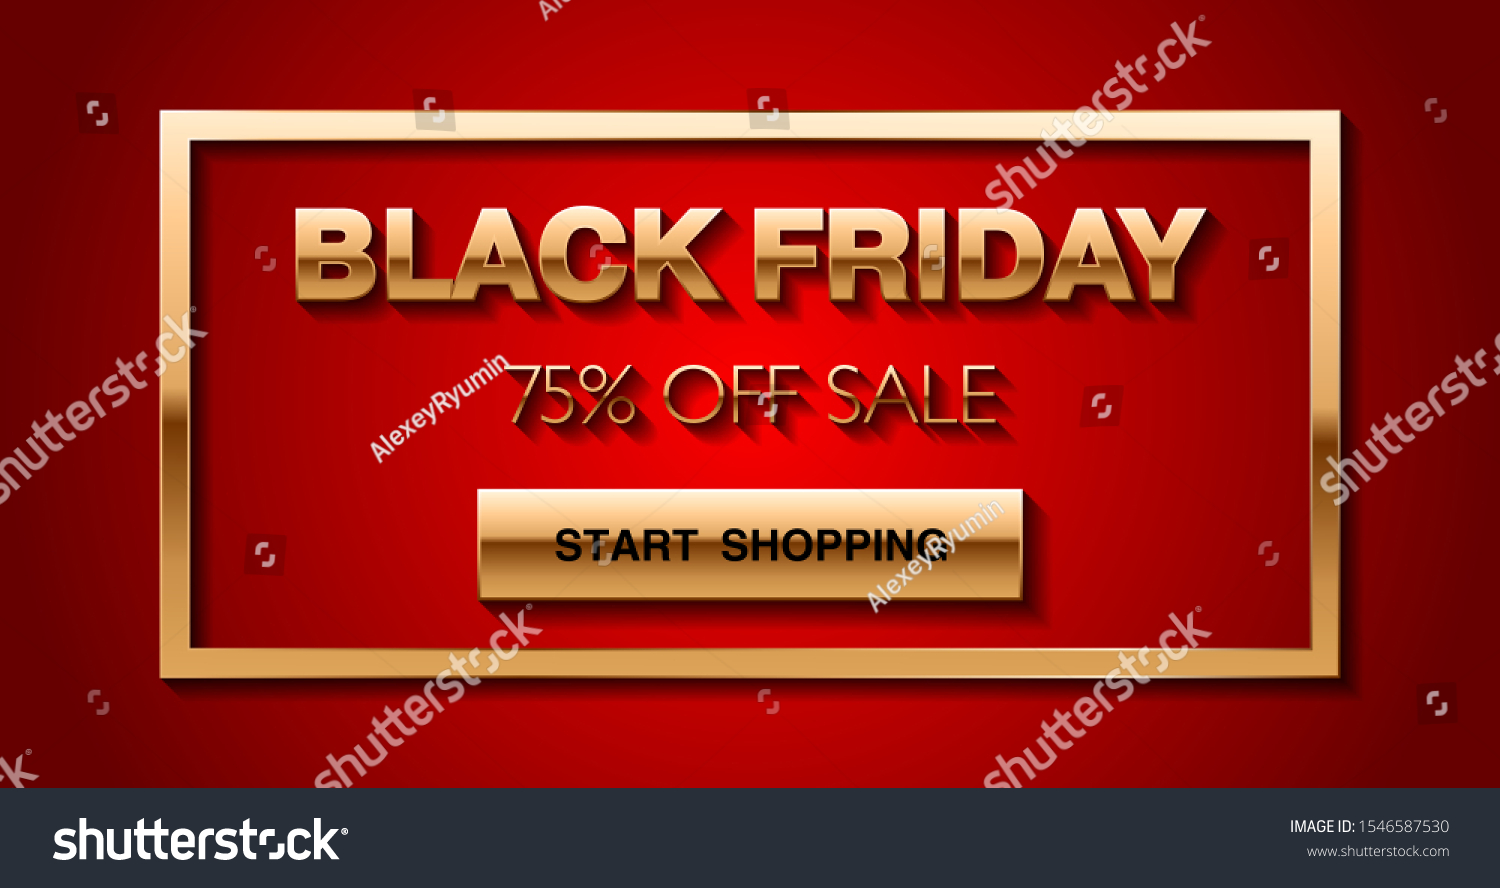 Golden text and frame on red gradient background. Black Friday Sale and Start Shopping lettering. Vector layout template for social media post, website, banner or email marketing.
